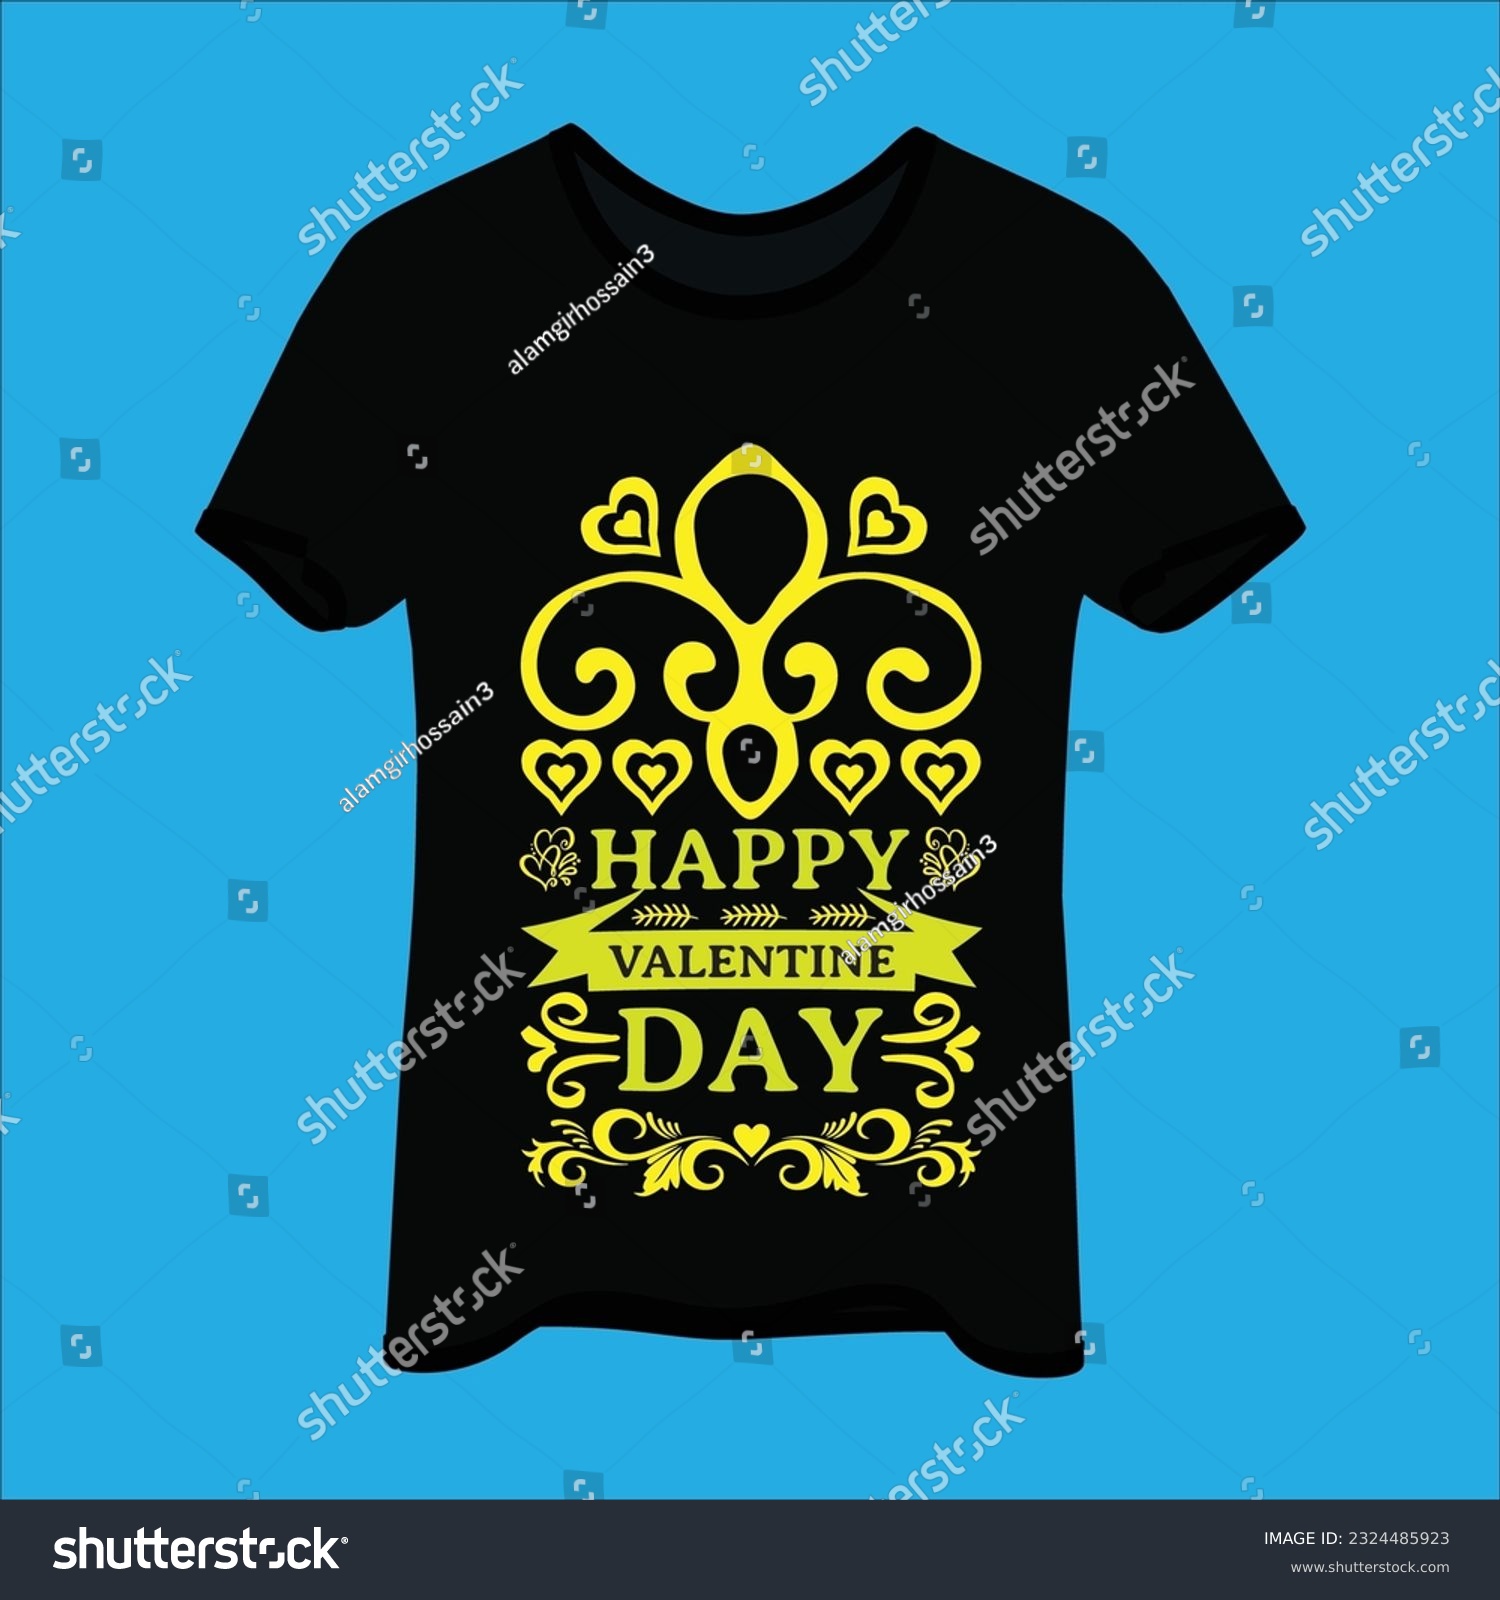 SVG of Happy valentine day 3 t-shirt design. Here You Can find and Buy t-Shirt Design. Digital Files for yourself, friends and family, or anyone who supports your Special Day and Occasions. svg